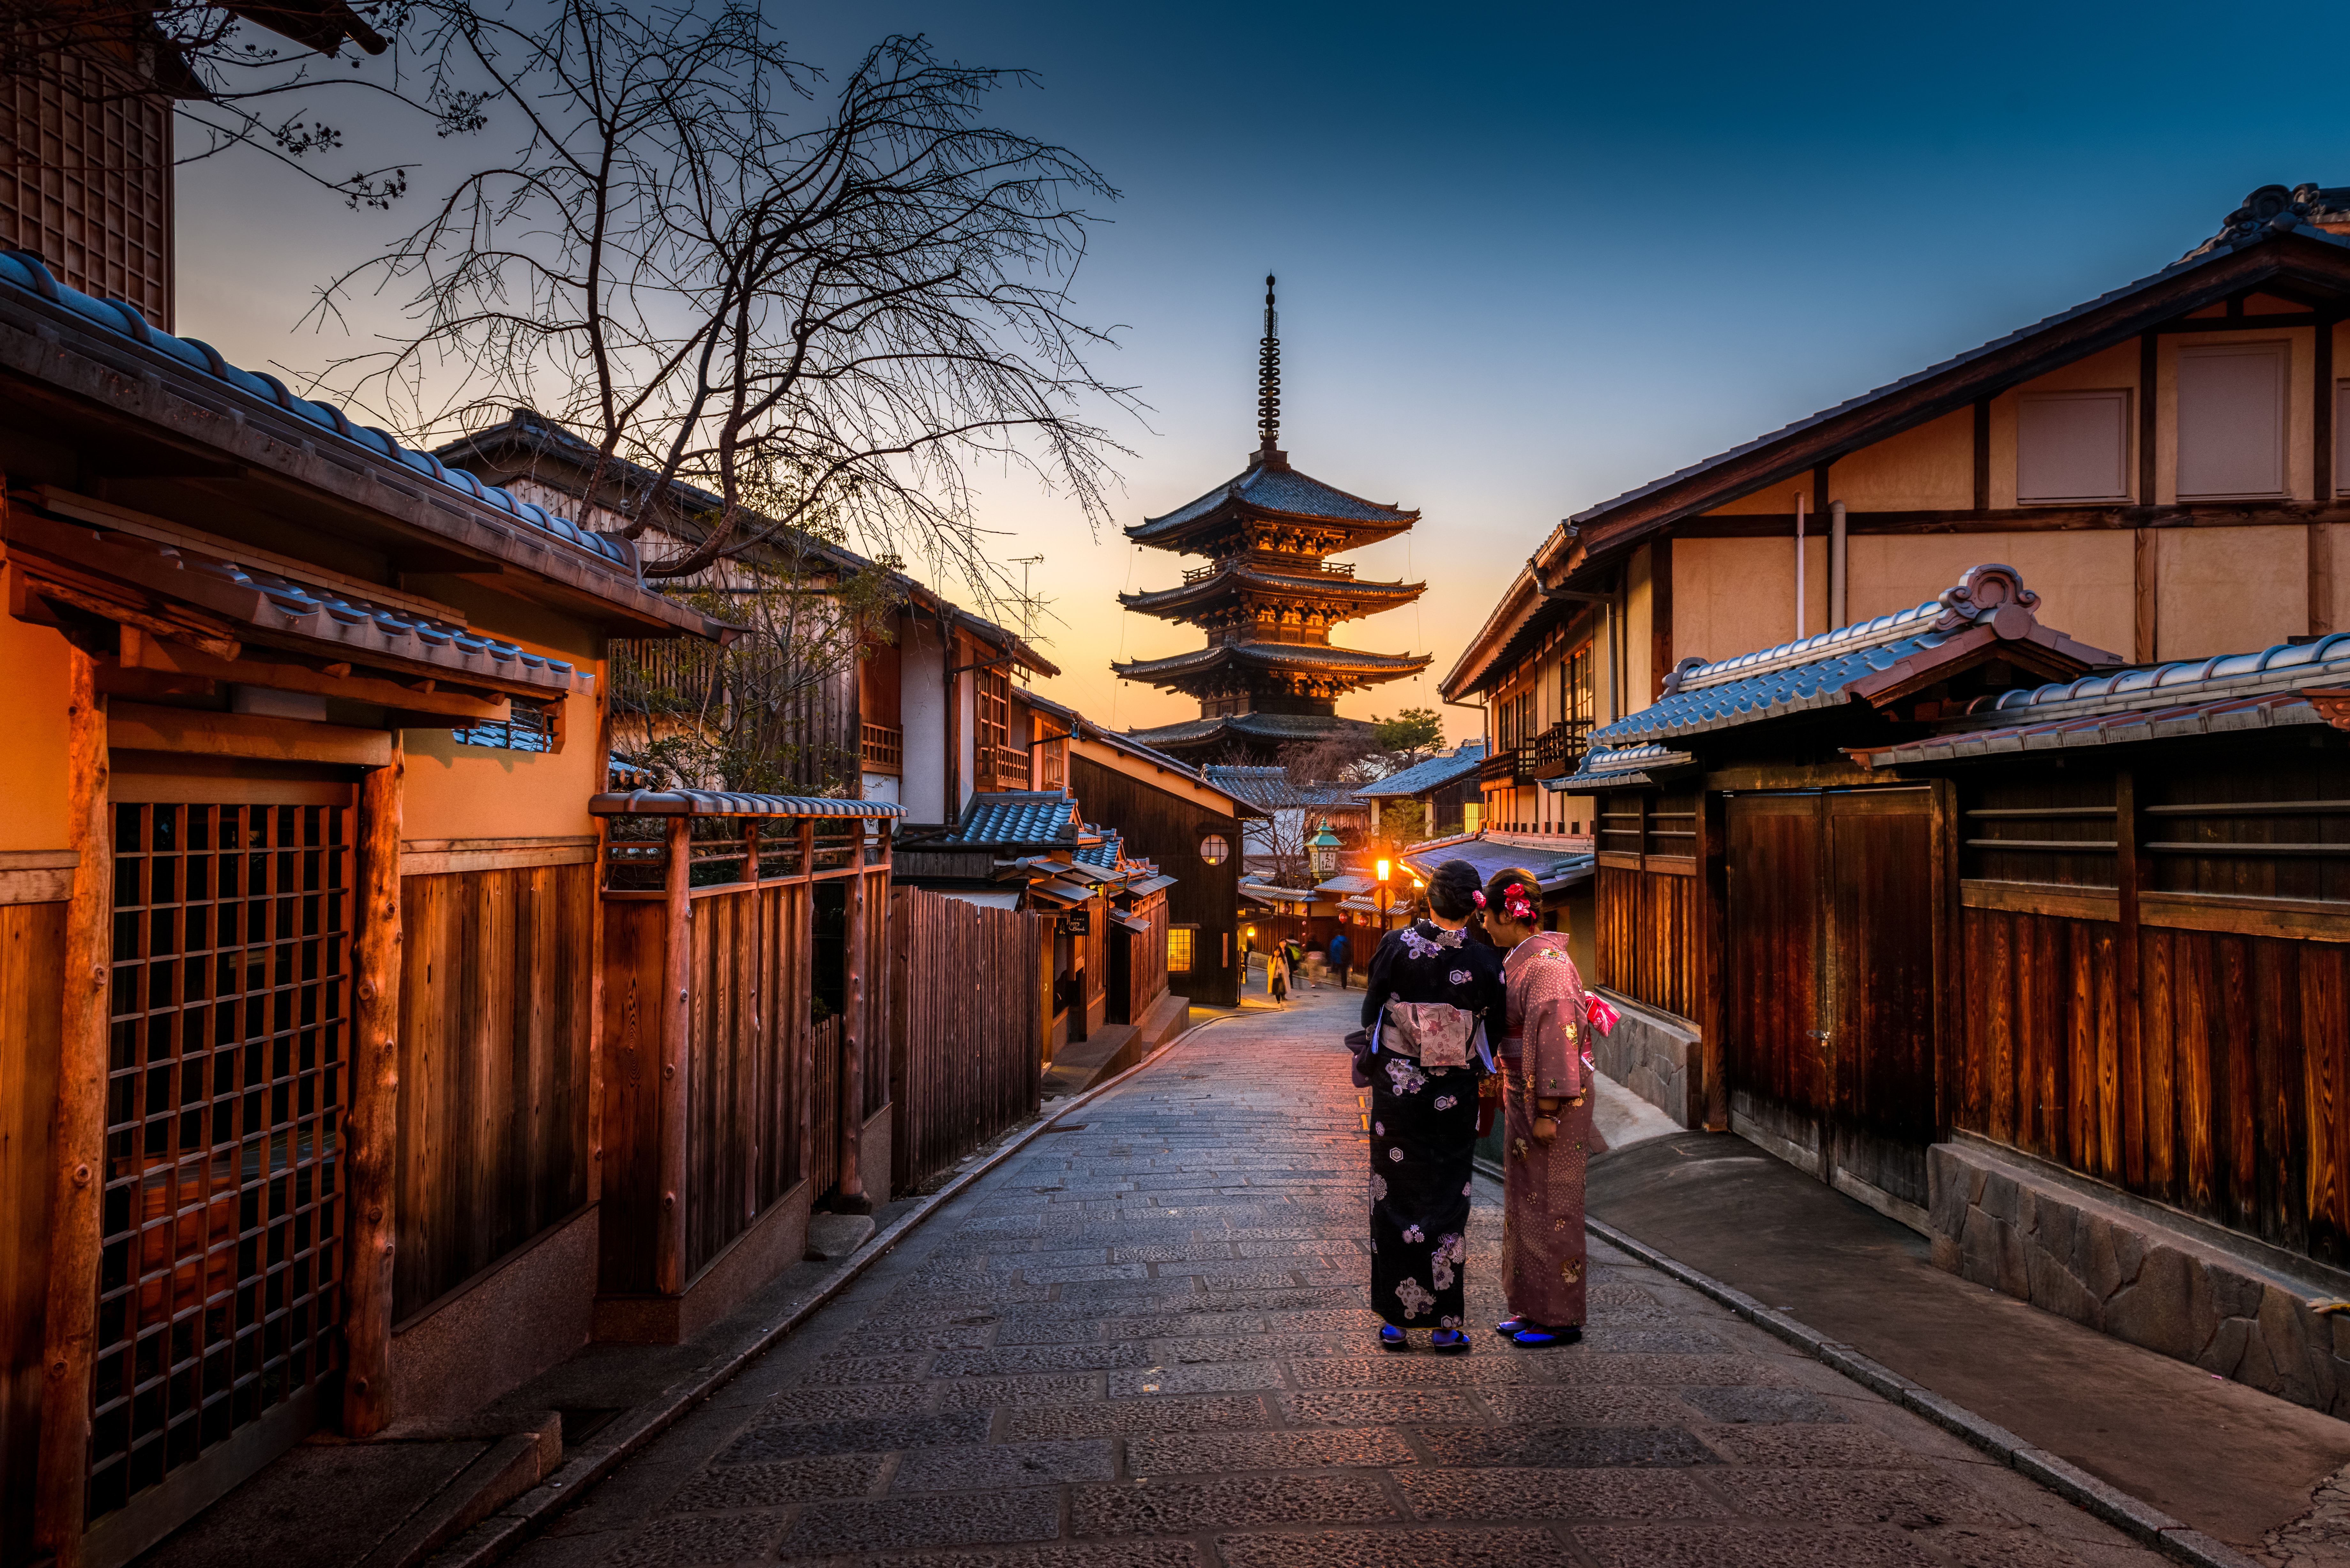 Iconic View of Kyoto's Traditional Architecture and Cherry Blossoms. Solange Isaacs.